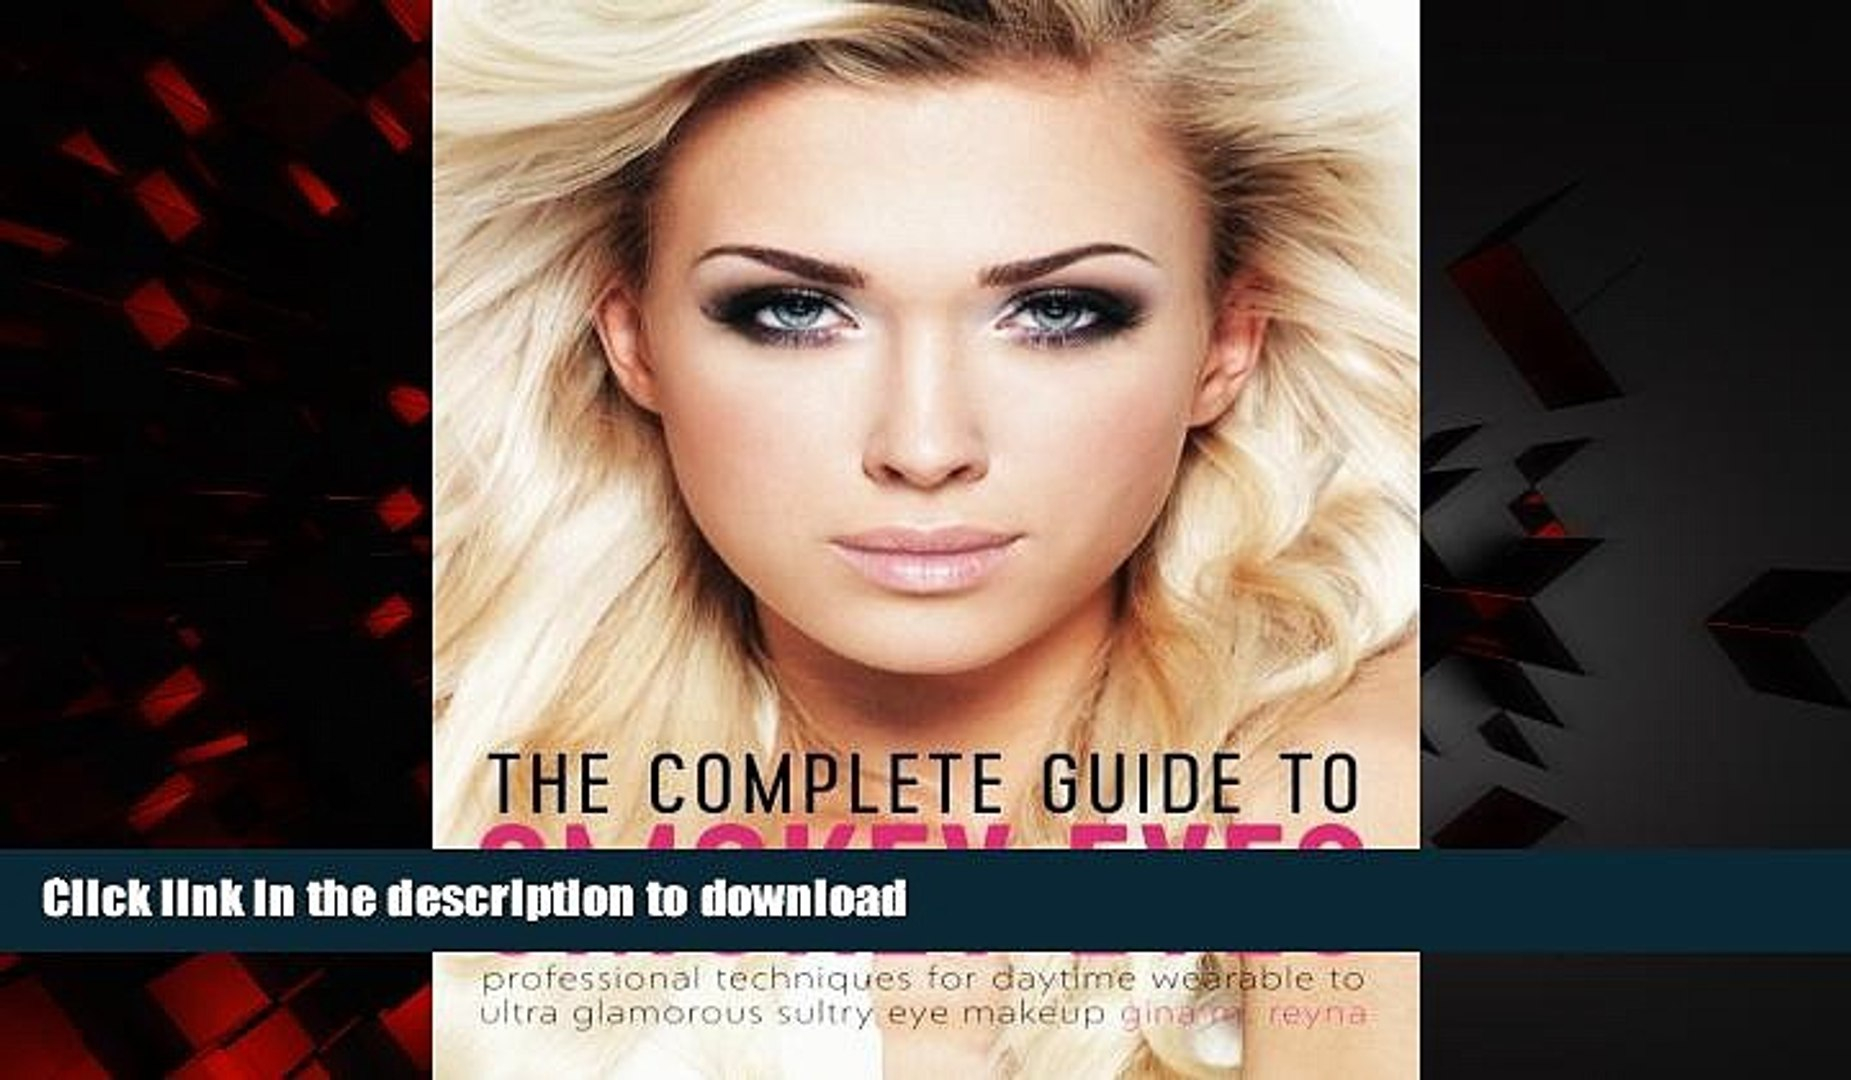 Daytime Eye Makeup Buy Books The Complete Guide To Smokey Eyes Professional Techniques